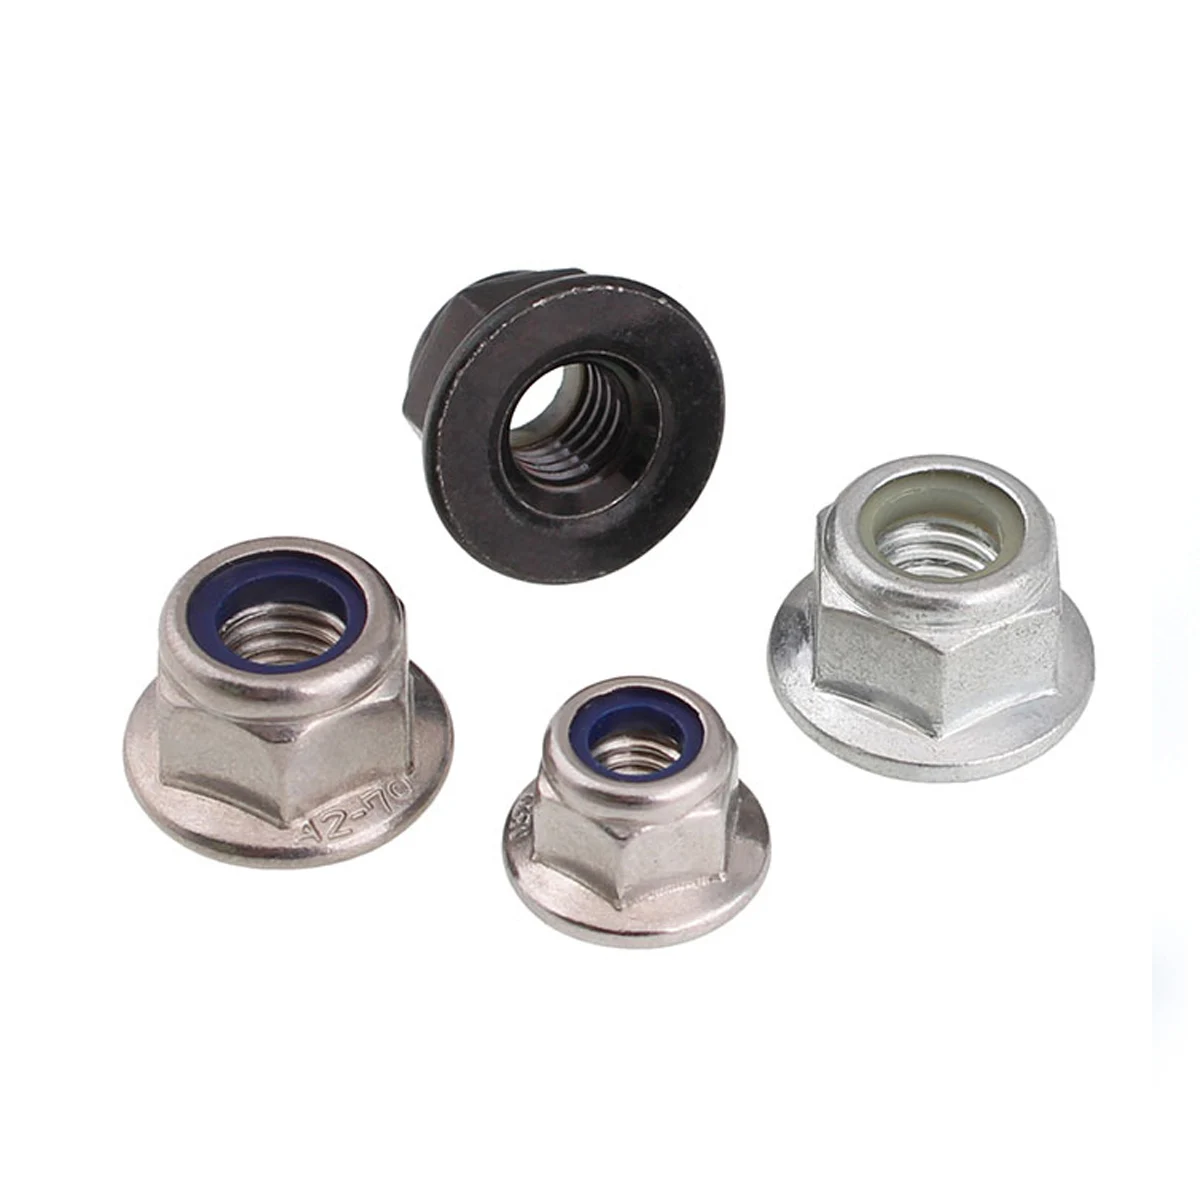 M3/M4/M5/M6/M8/M10/M12 NYLOC LOCK NUTS 316 A4 STAINLESS STEEL HEX LOCK NUTS 